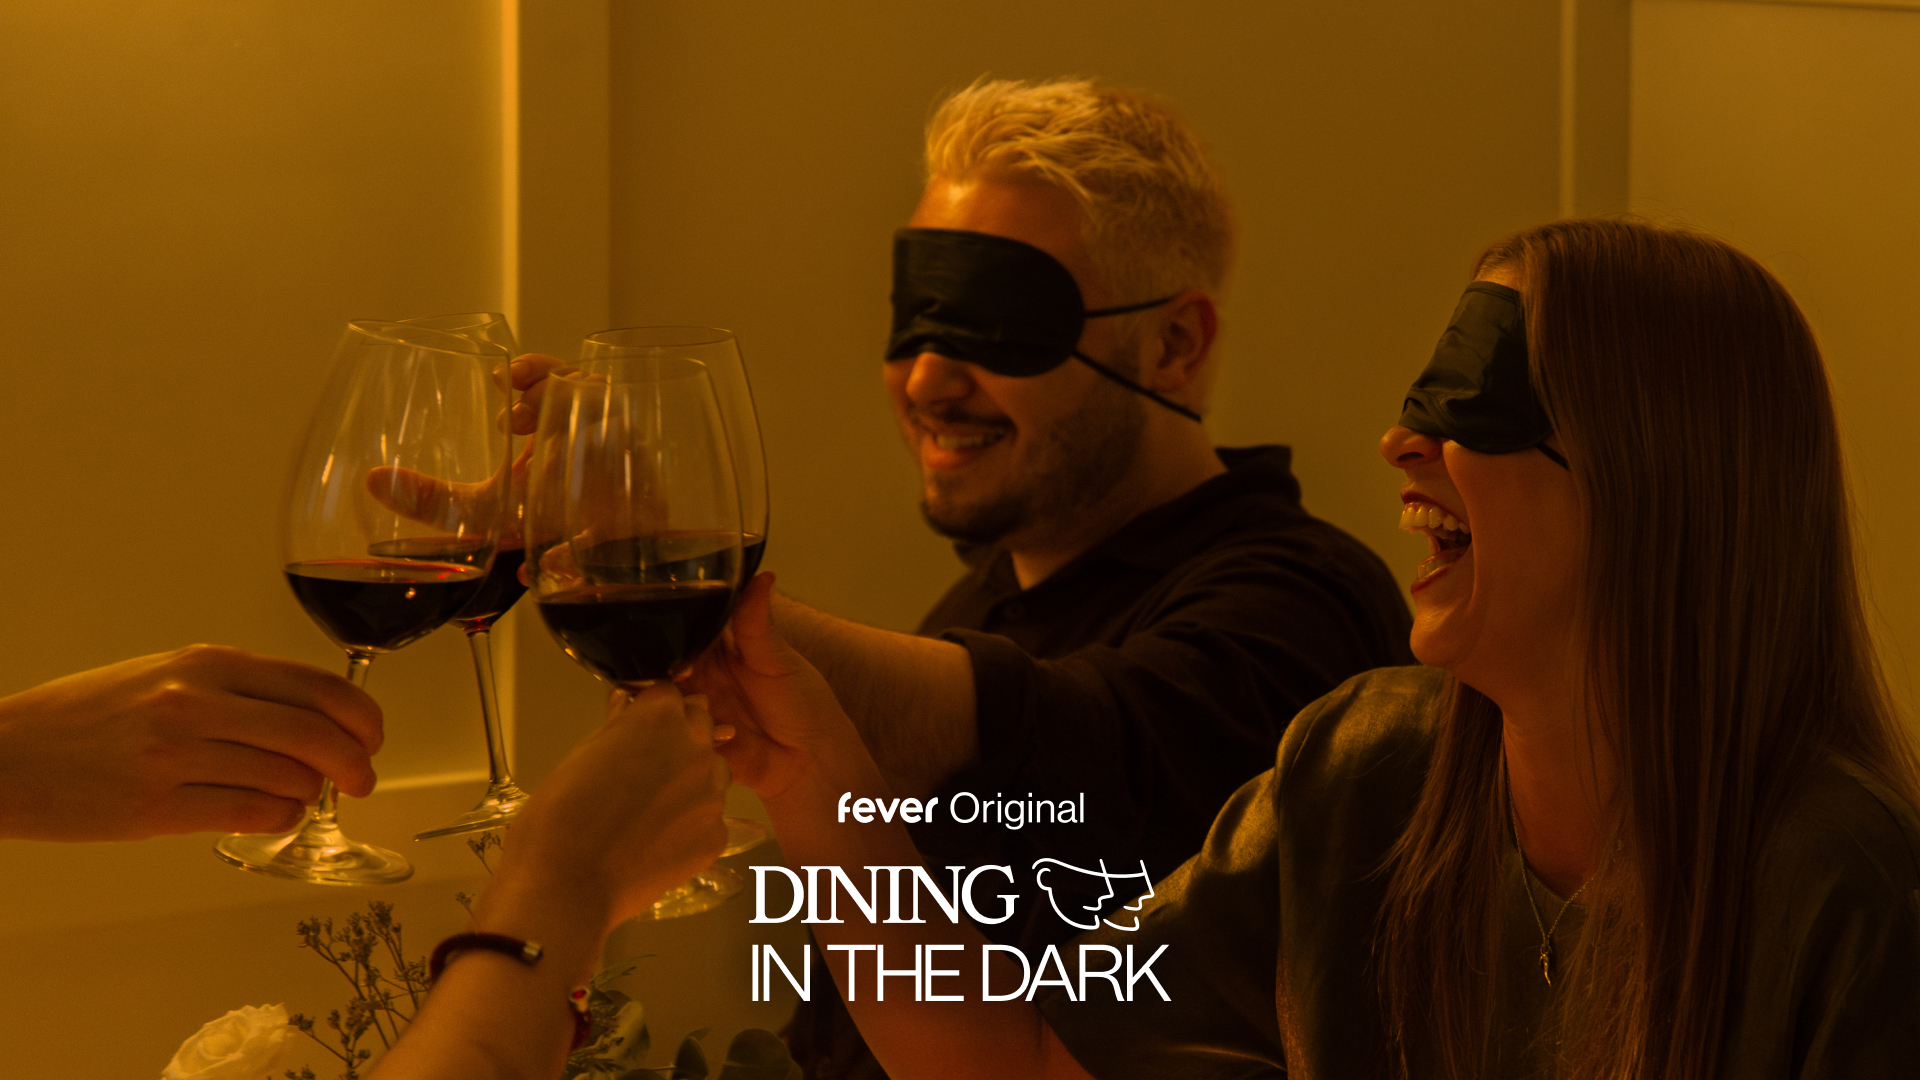 Visit the Dining in the Dark at MaryGold’s event page